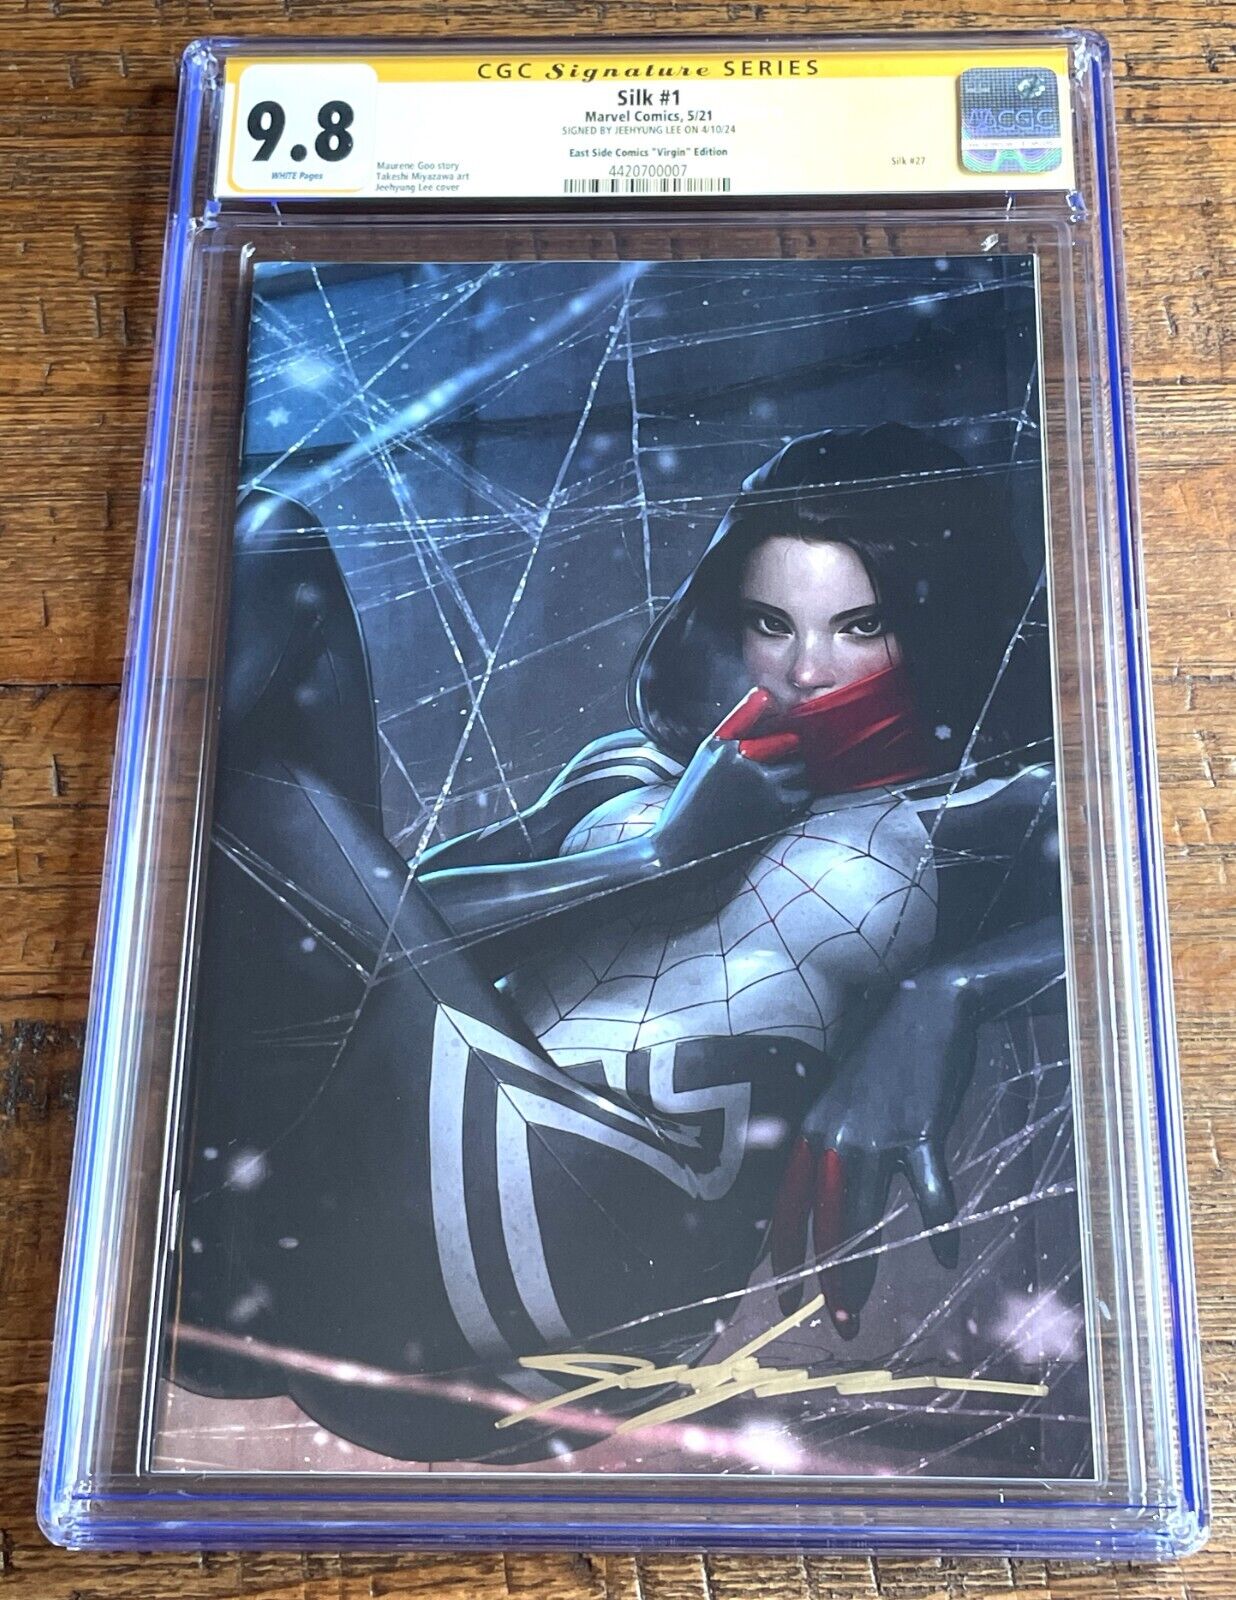 SILK #1 CGC SS 9.8 JEEHYUNG LEE SIGNED EXCL VIRGIN VARIANT-B SPIDER-MAN VENOM